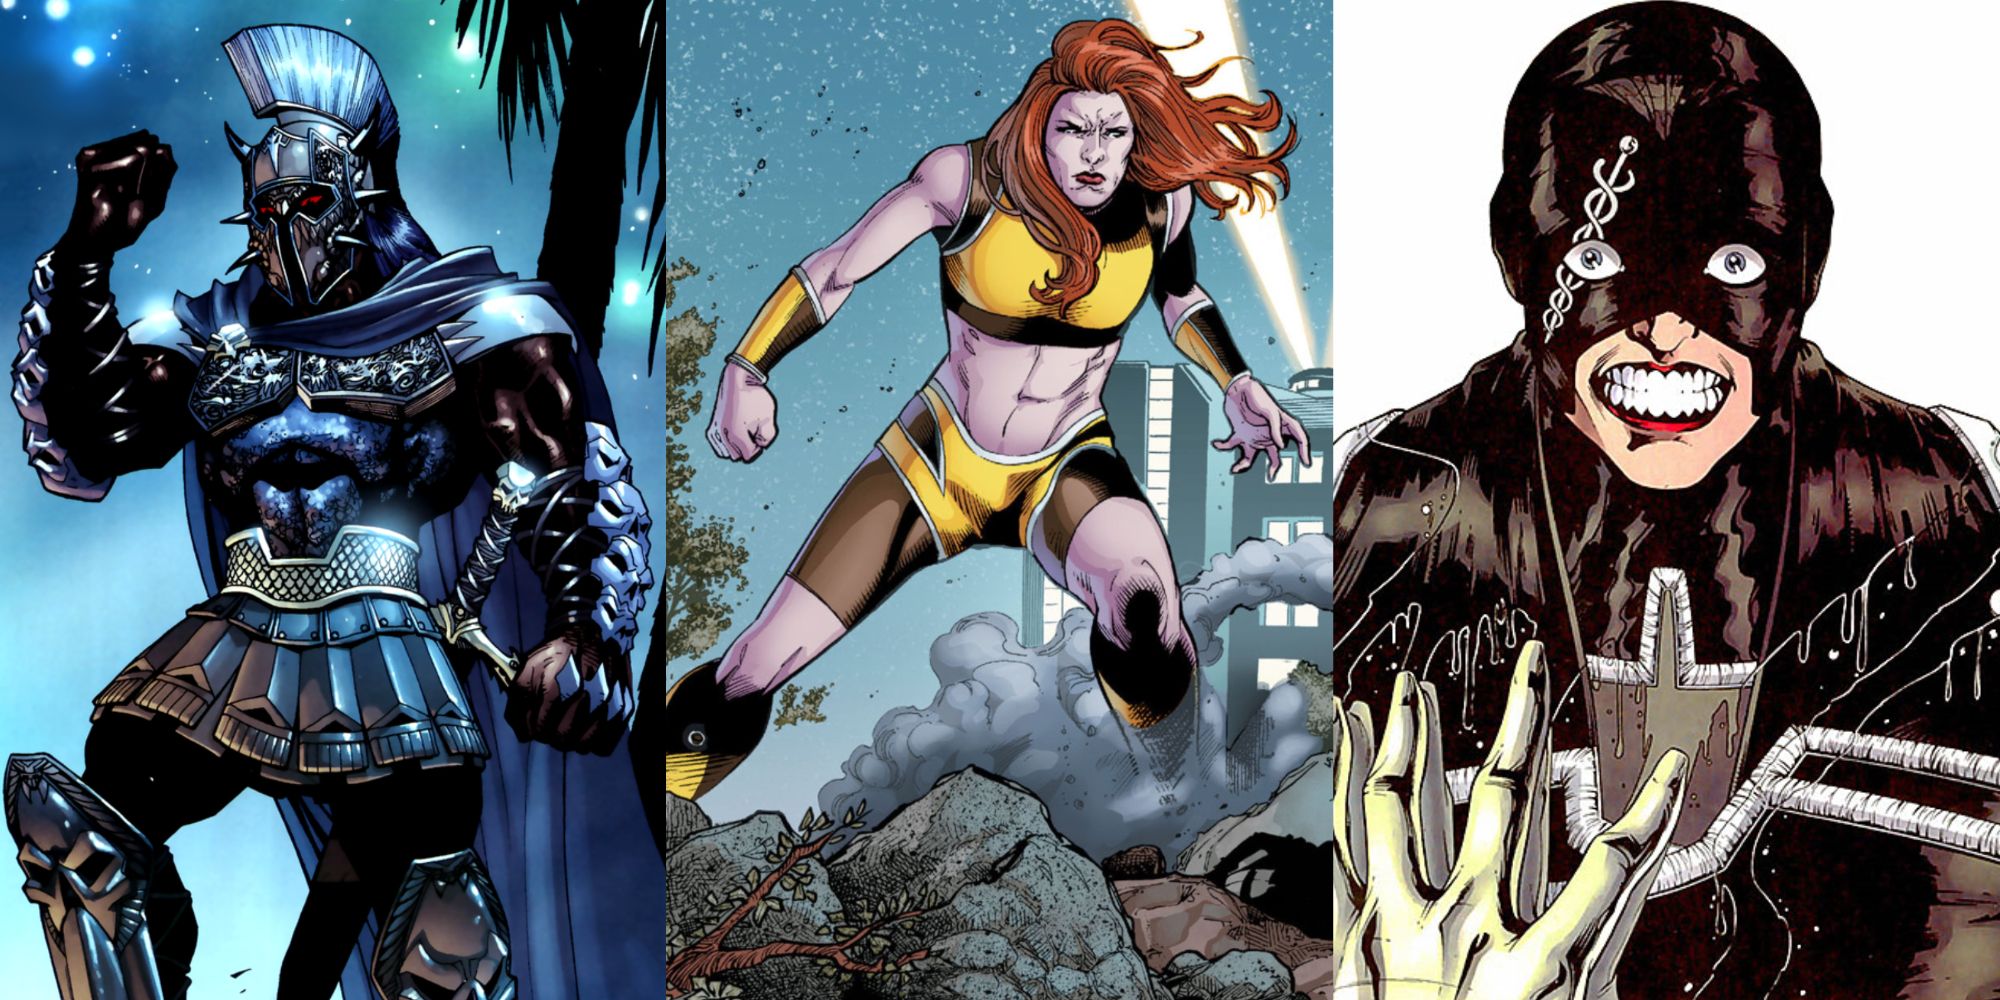 From left to right: Ares, Giganta, and Doctor Poison - Wonder Woman enemies 